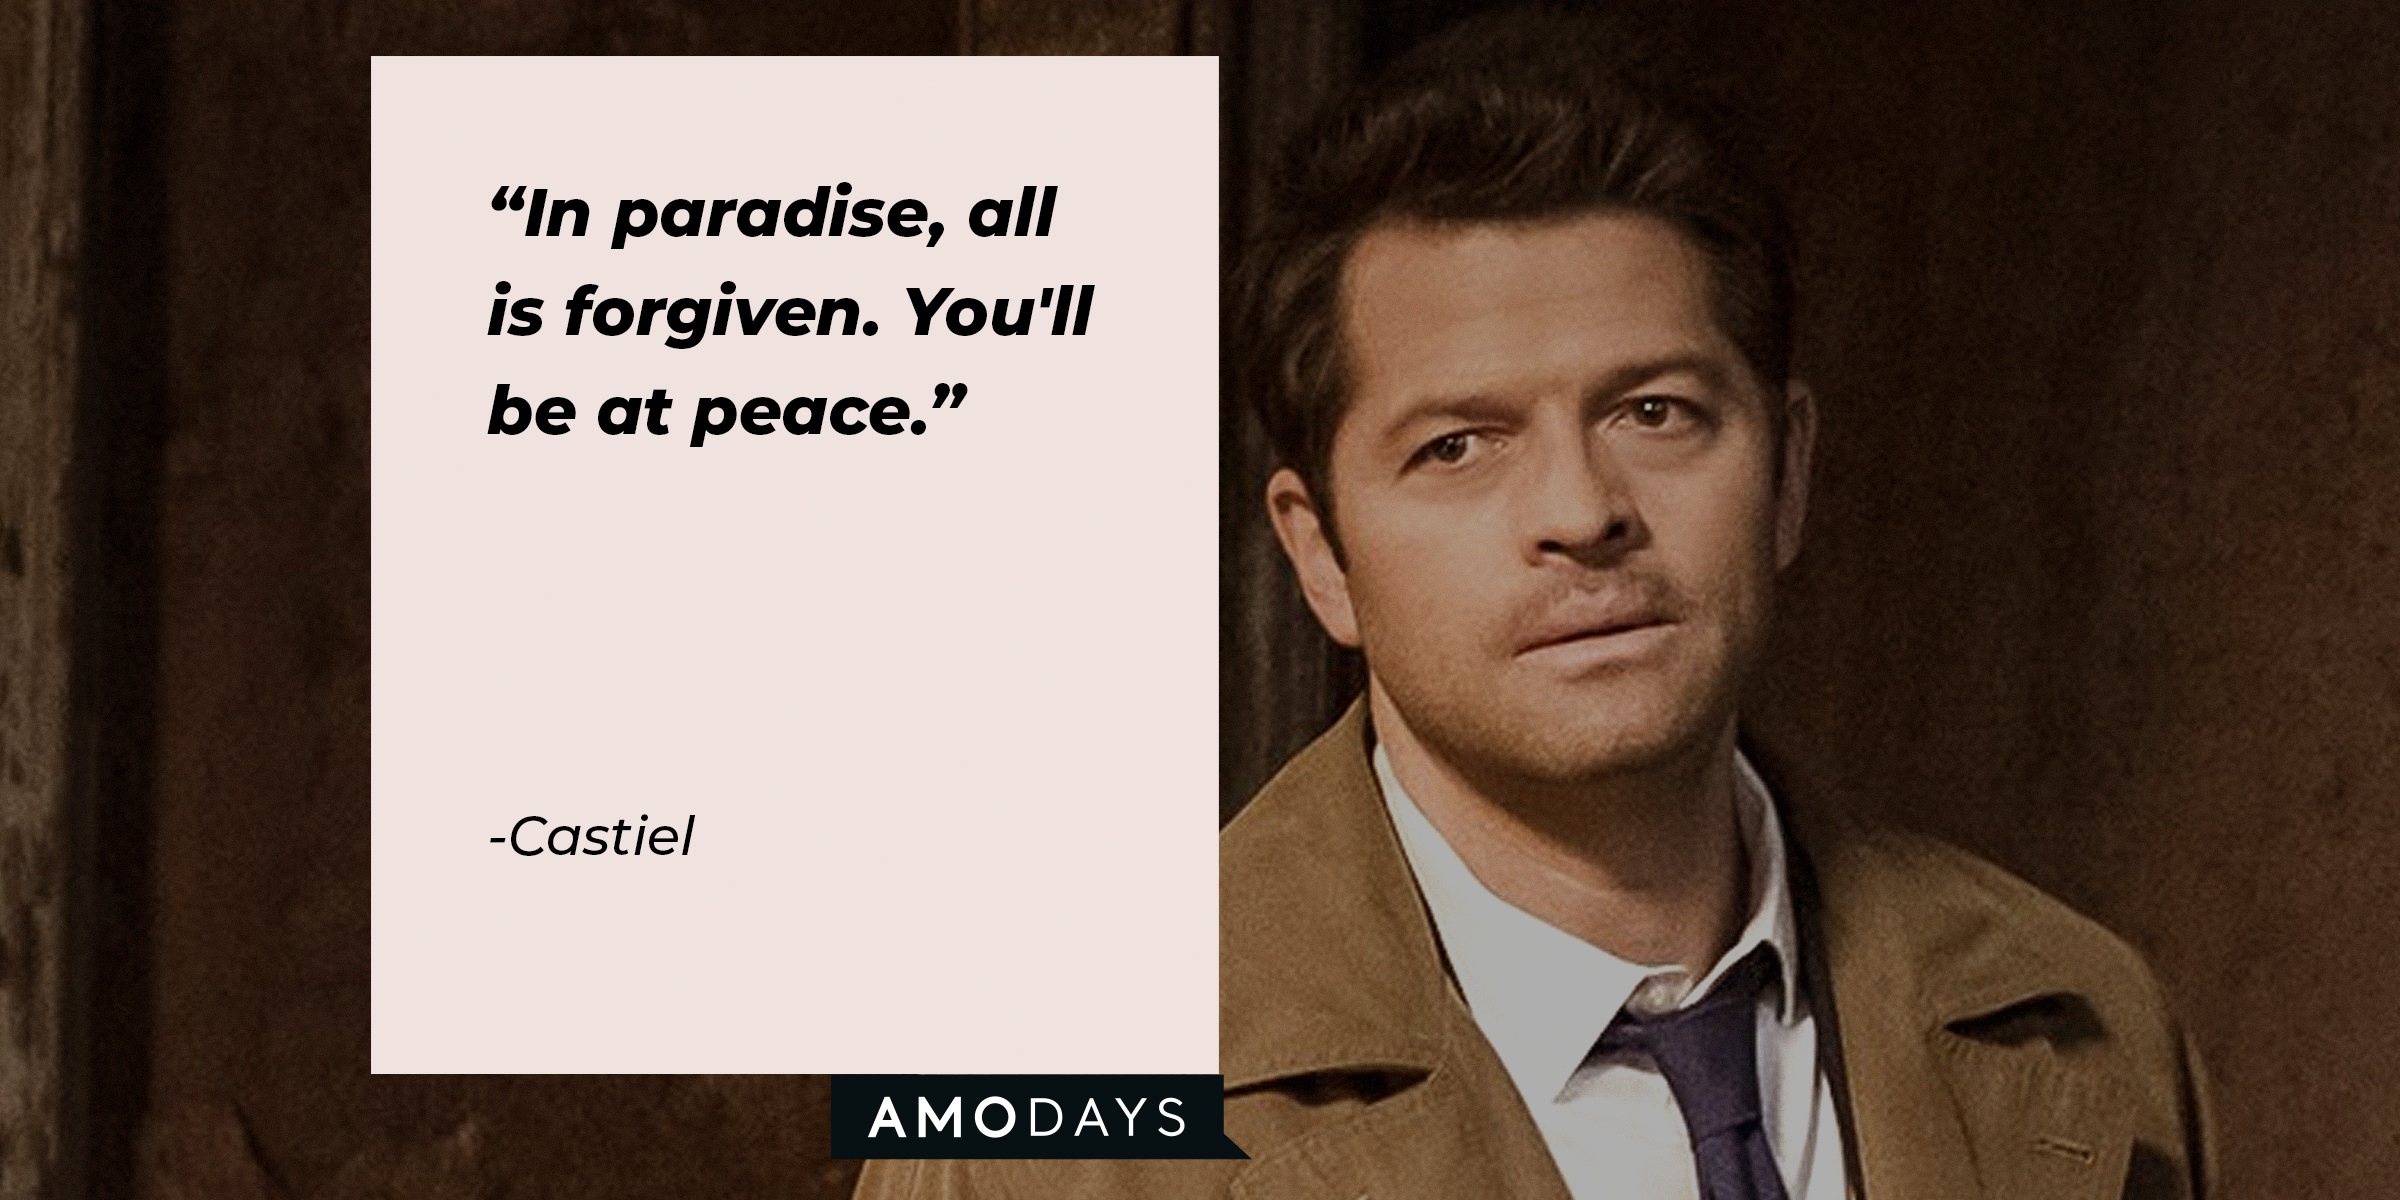 A painted image of Castiel with his quote: "In paradise, all is forgiven. You'll be at peace." | Source: facebook.com/Supernatural